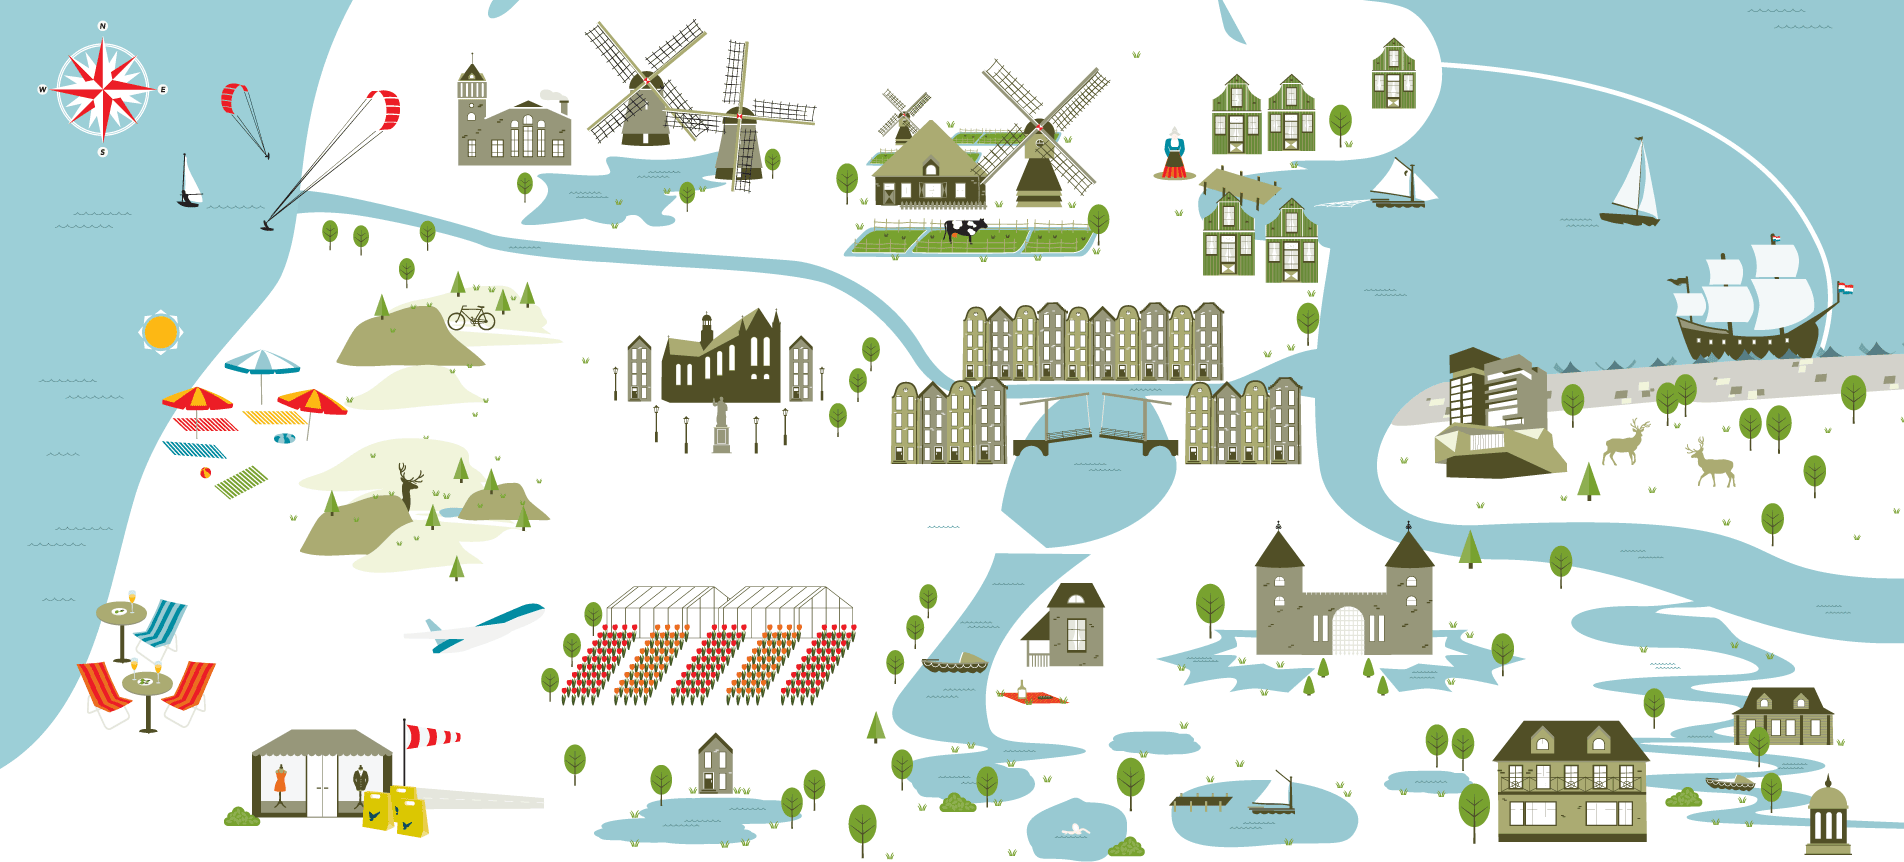 /assets/contentimages/Amsterdam_Map.gif